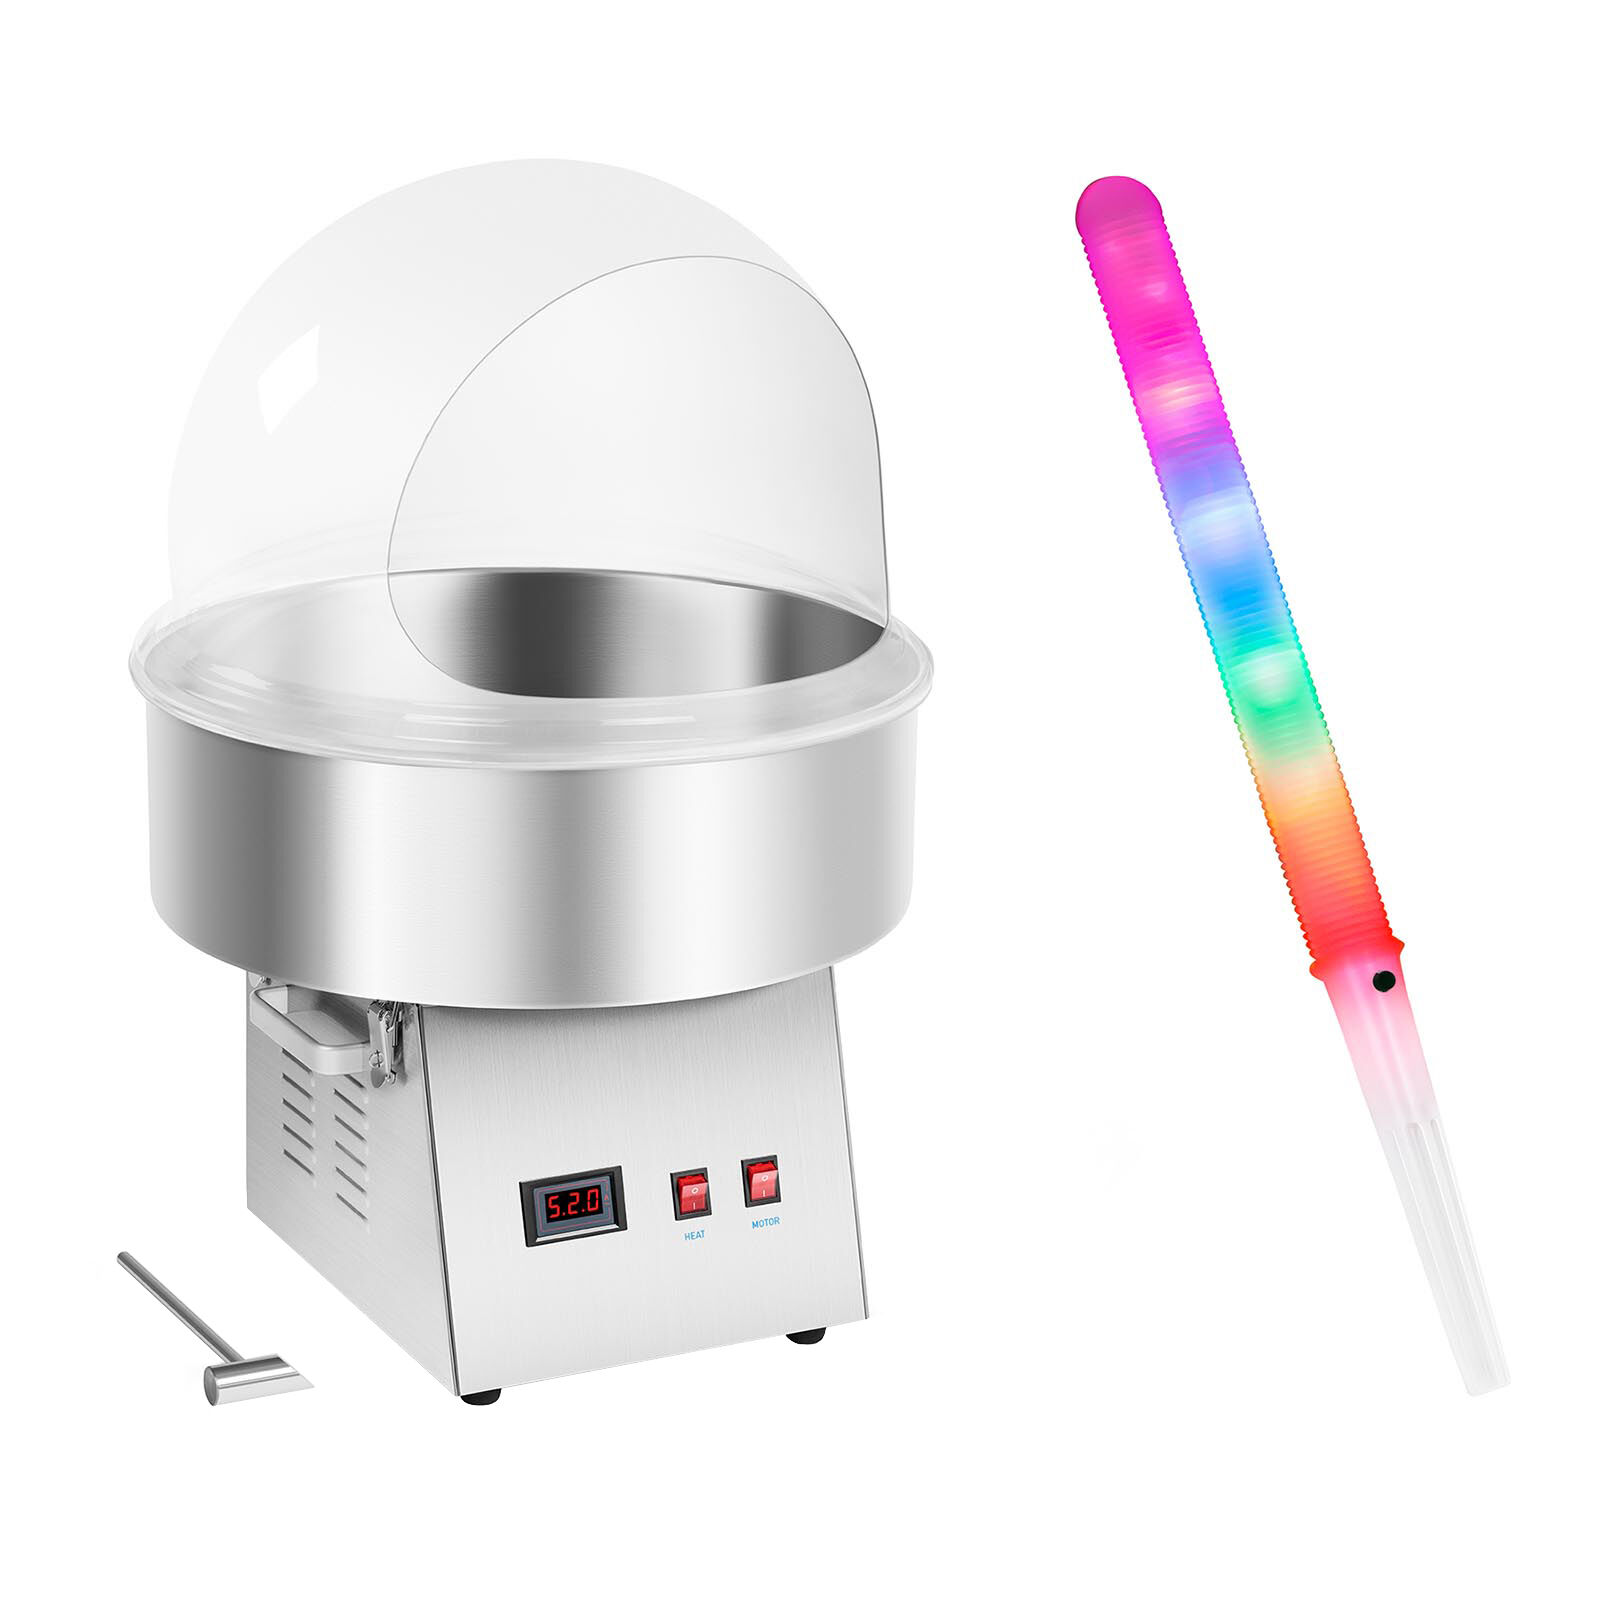 Royal Catering Candy Floss Machine Set with LED Cotton Candy Sticks - Sneeze Guard - 52 cm - 1,030 watts RCZK-1030-W SET2